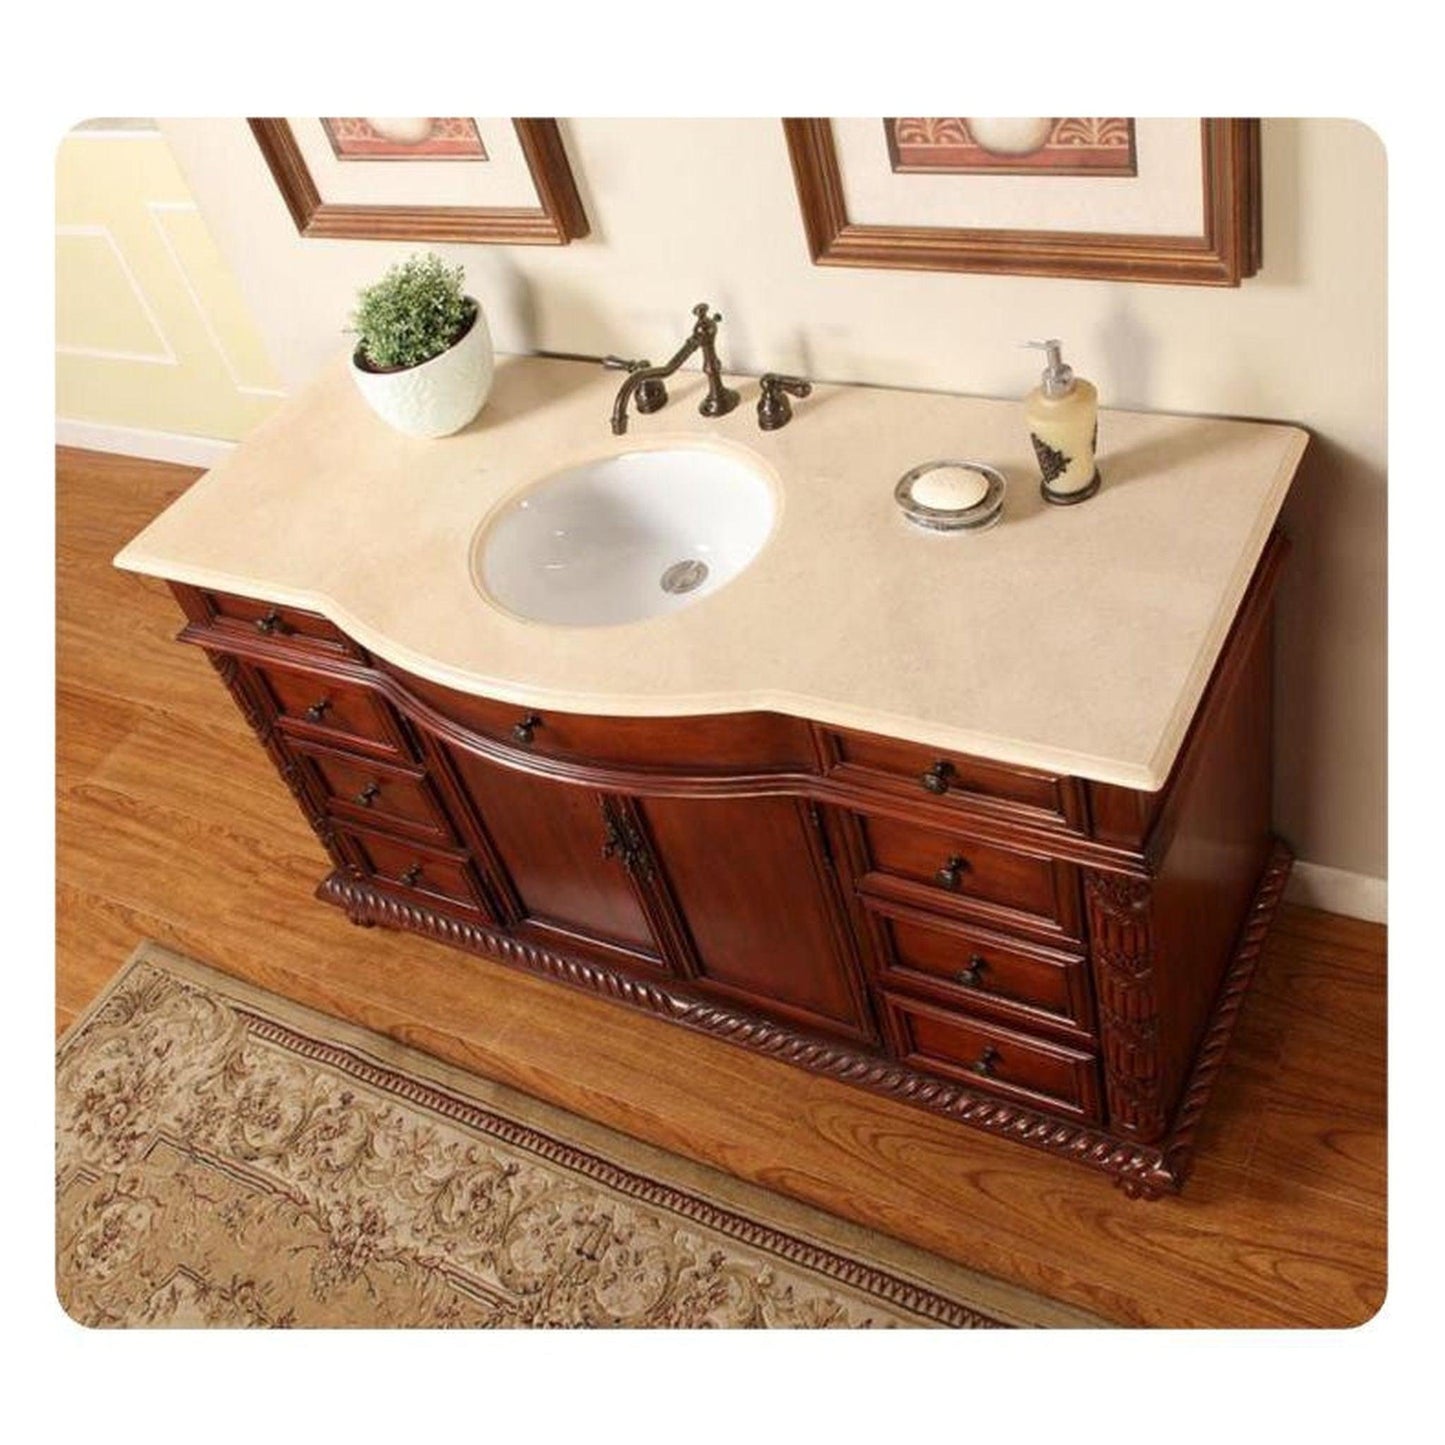 Silkroad Exclusive 60" Single Sink Red Chestnut Bathroom Vanity With Crema Marfil Marble Countertop and White Ceramic Undermount Sink